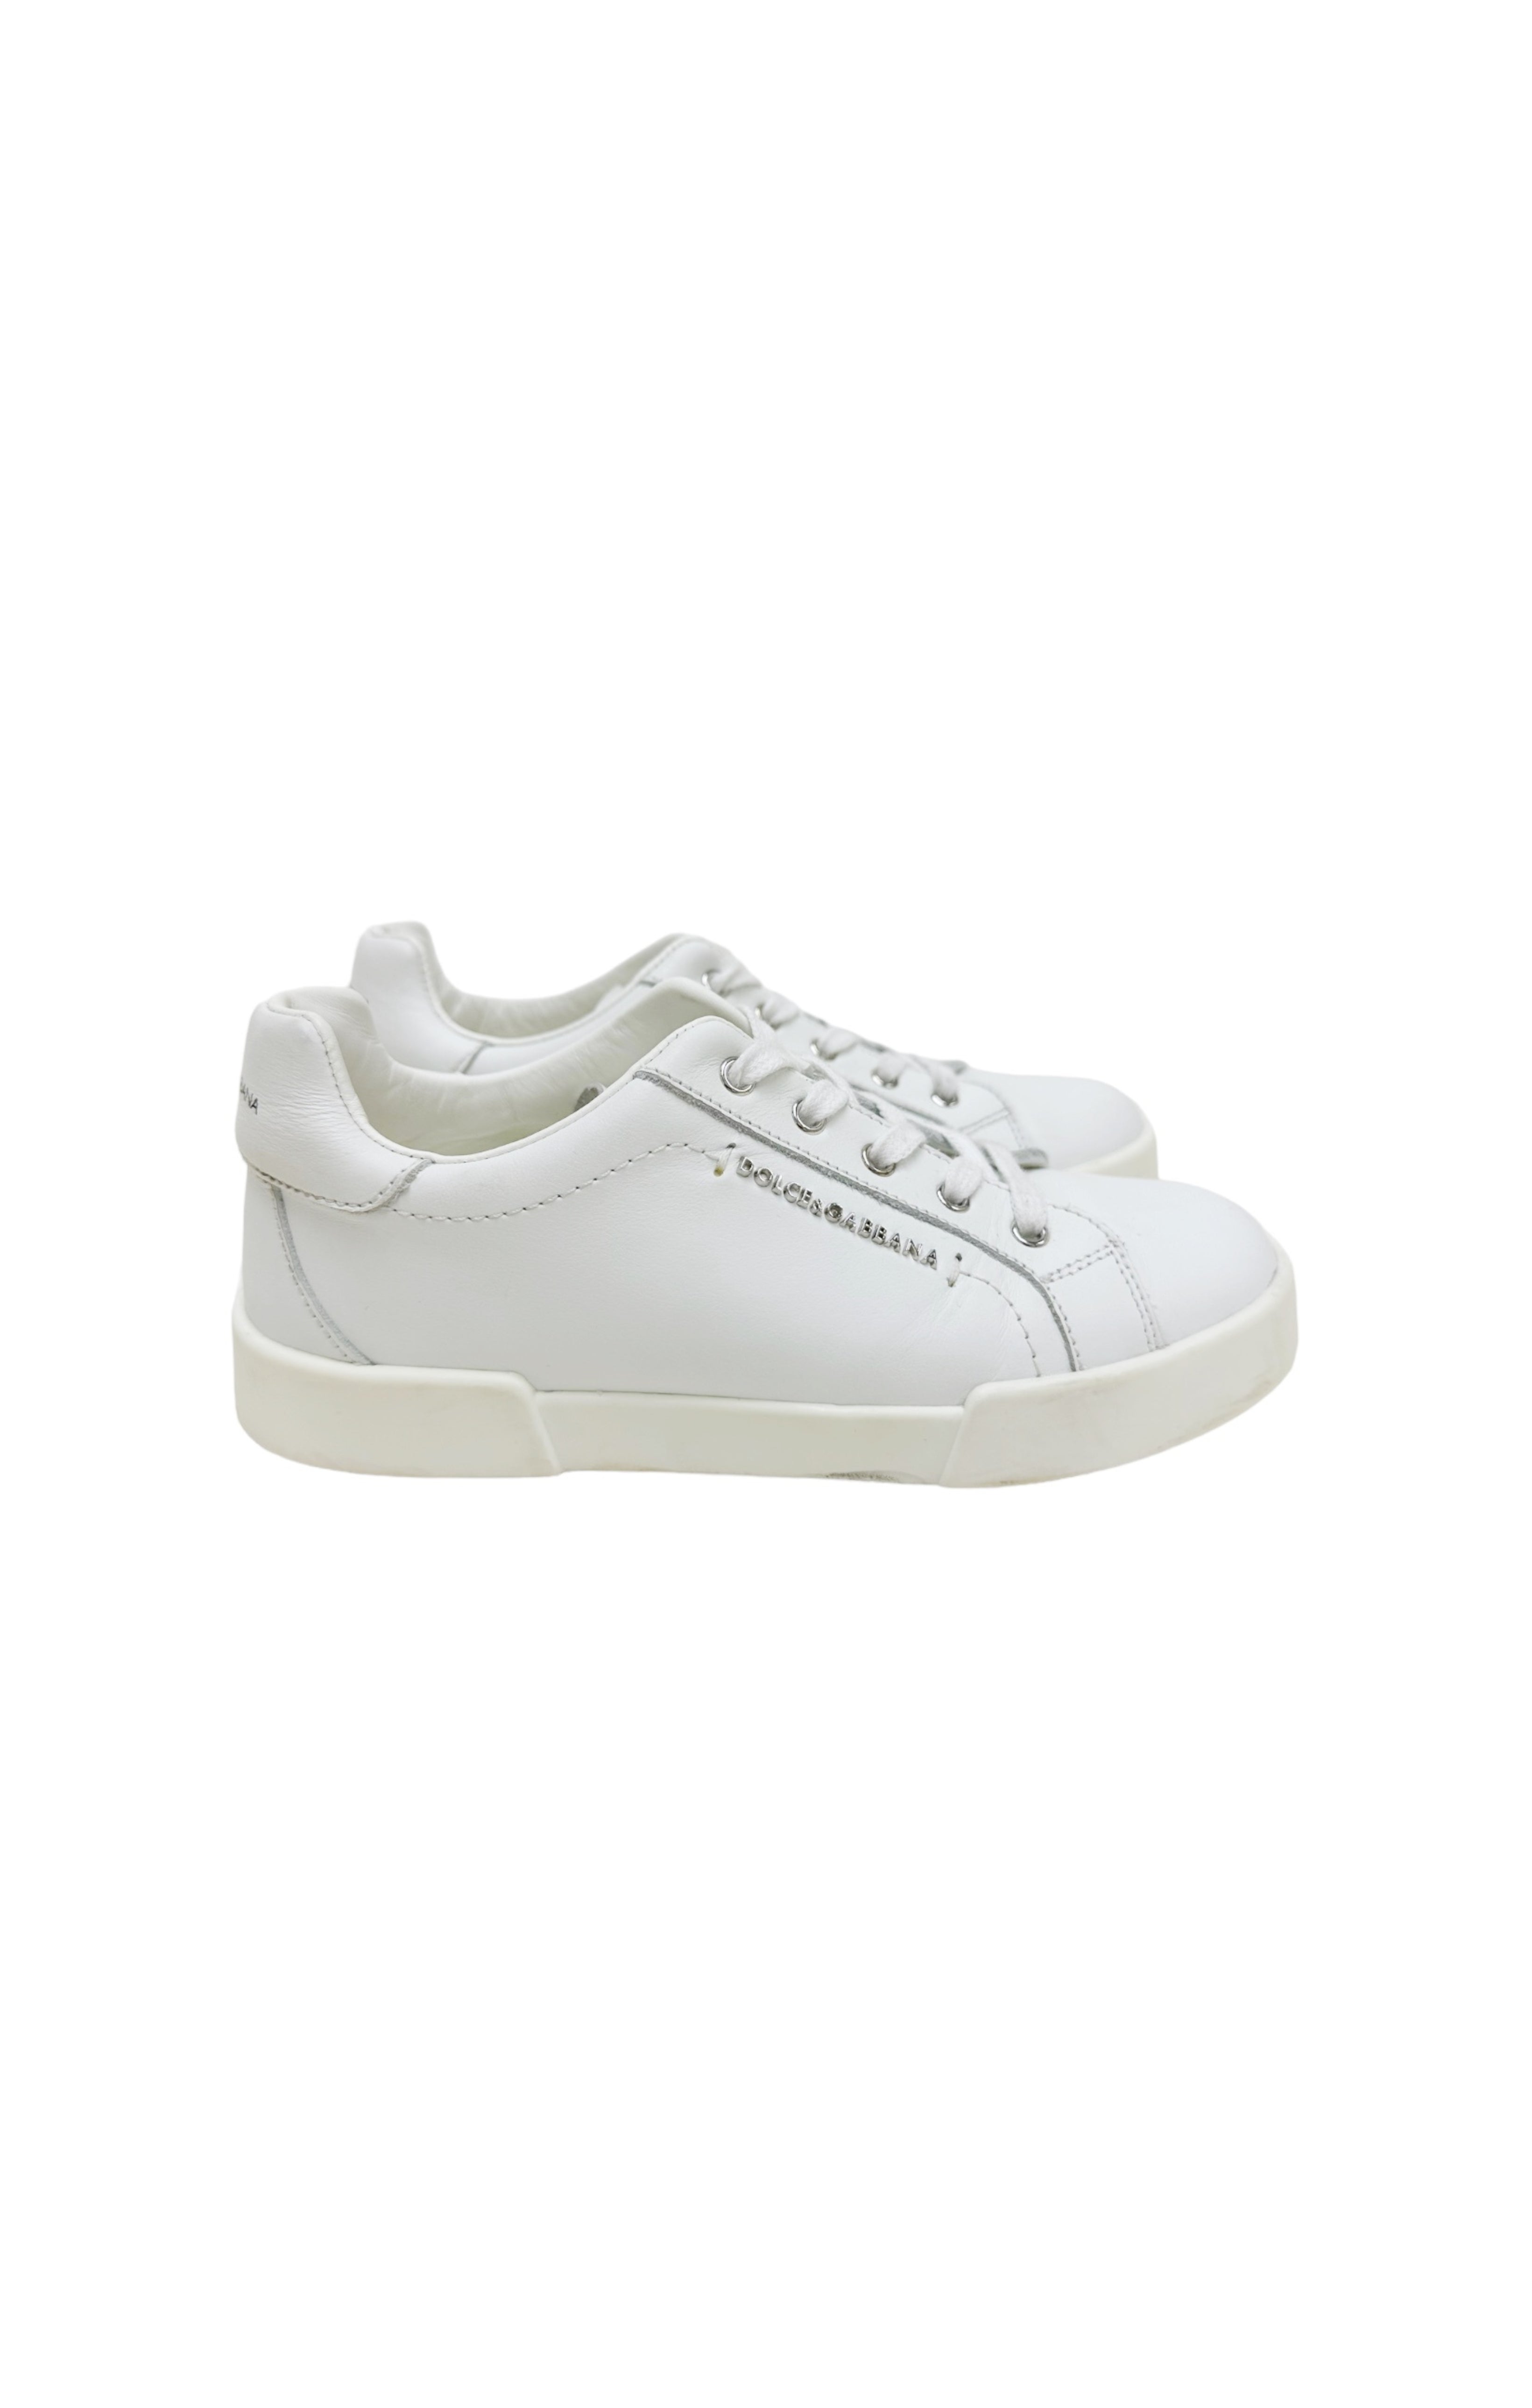 DOLCE & GABBANA Sneakers Size: EUR 31 / Fits like Toddler US 13